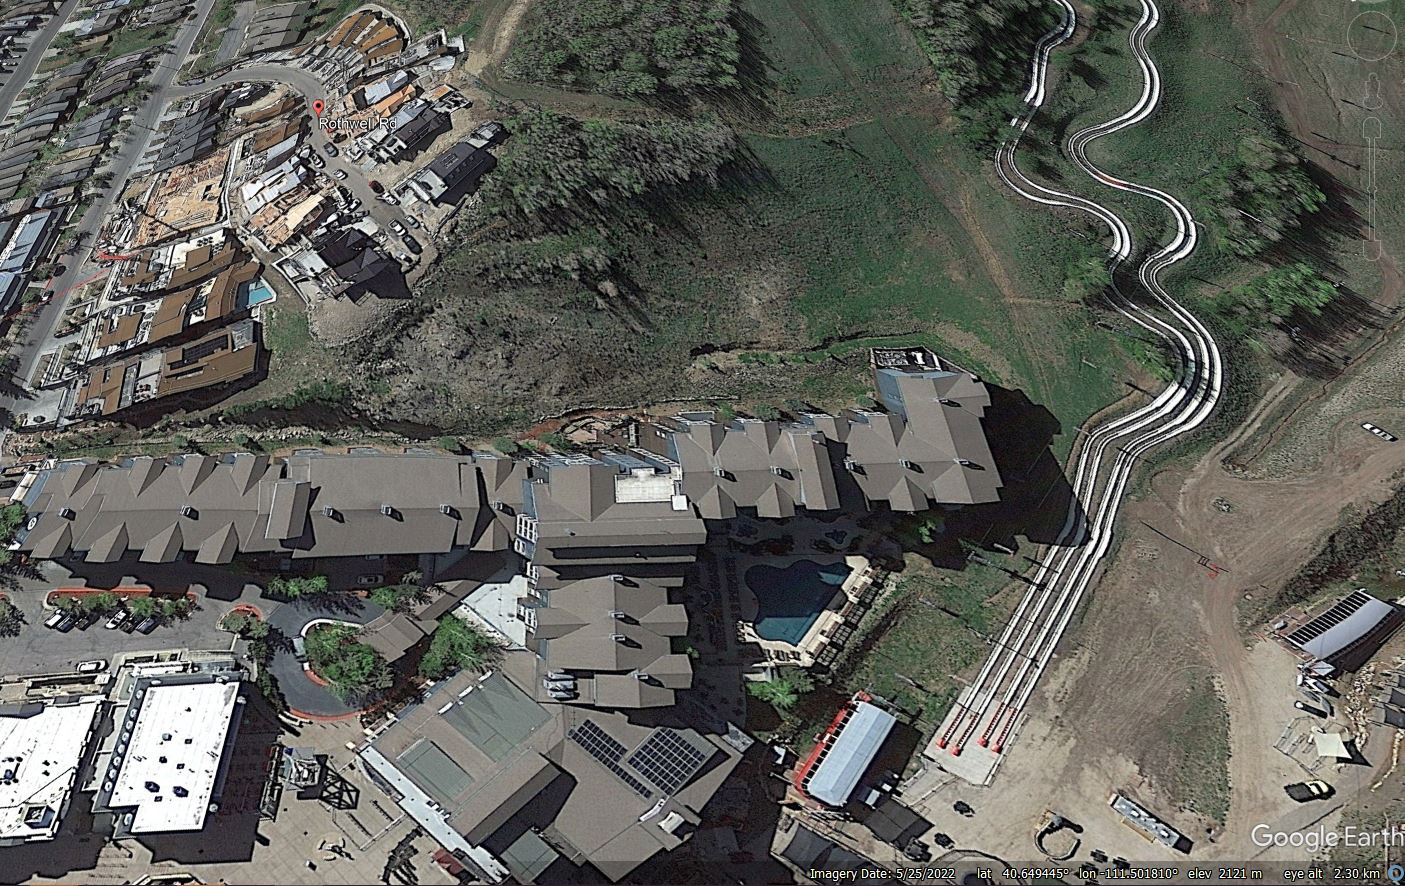 Google Earth image from 2022 showing the site of the 30 April 2023 landslide at Park City in Utah.